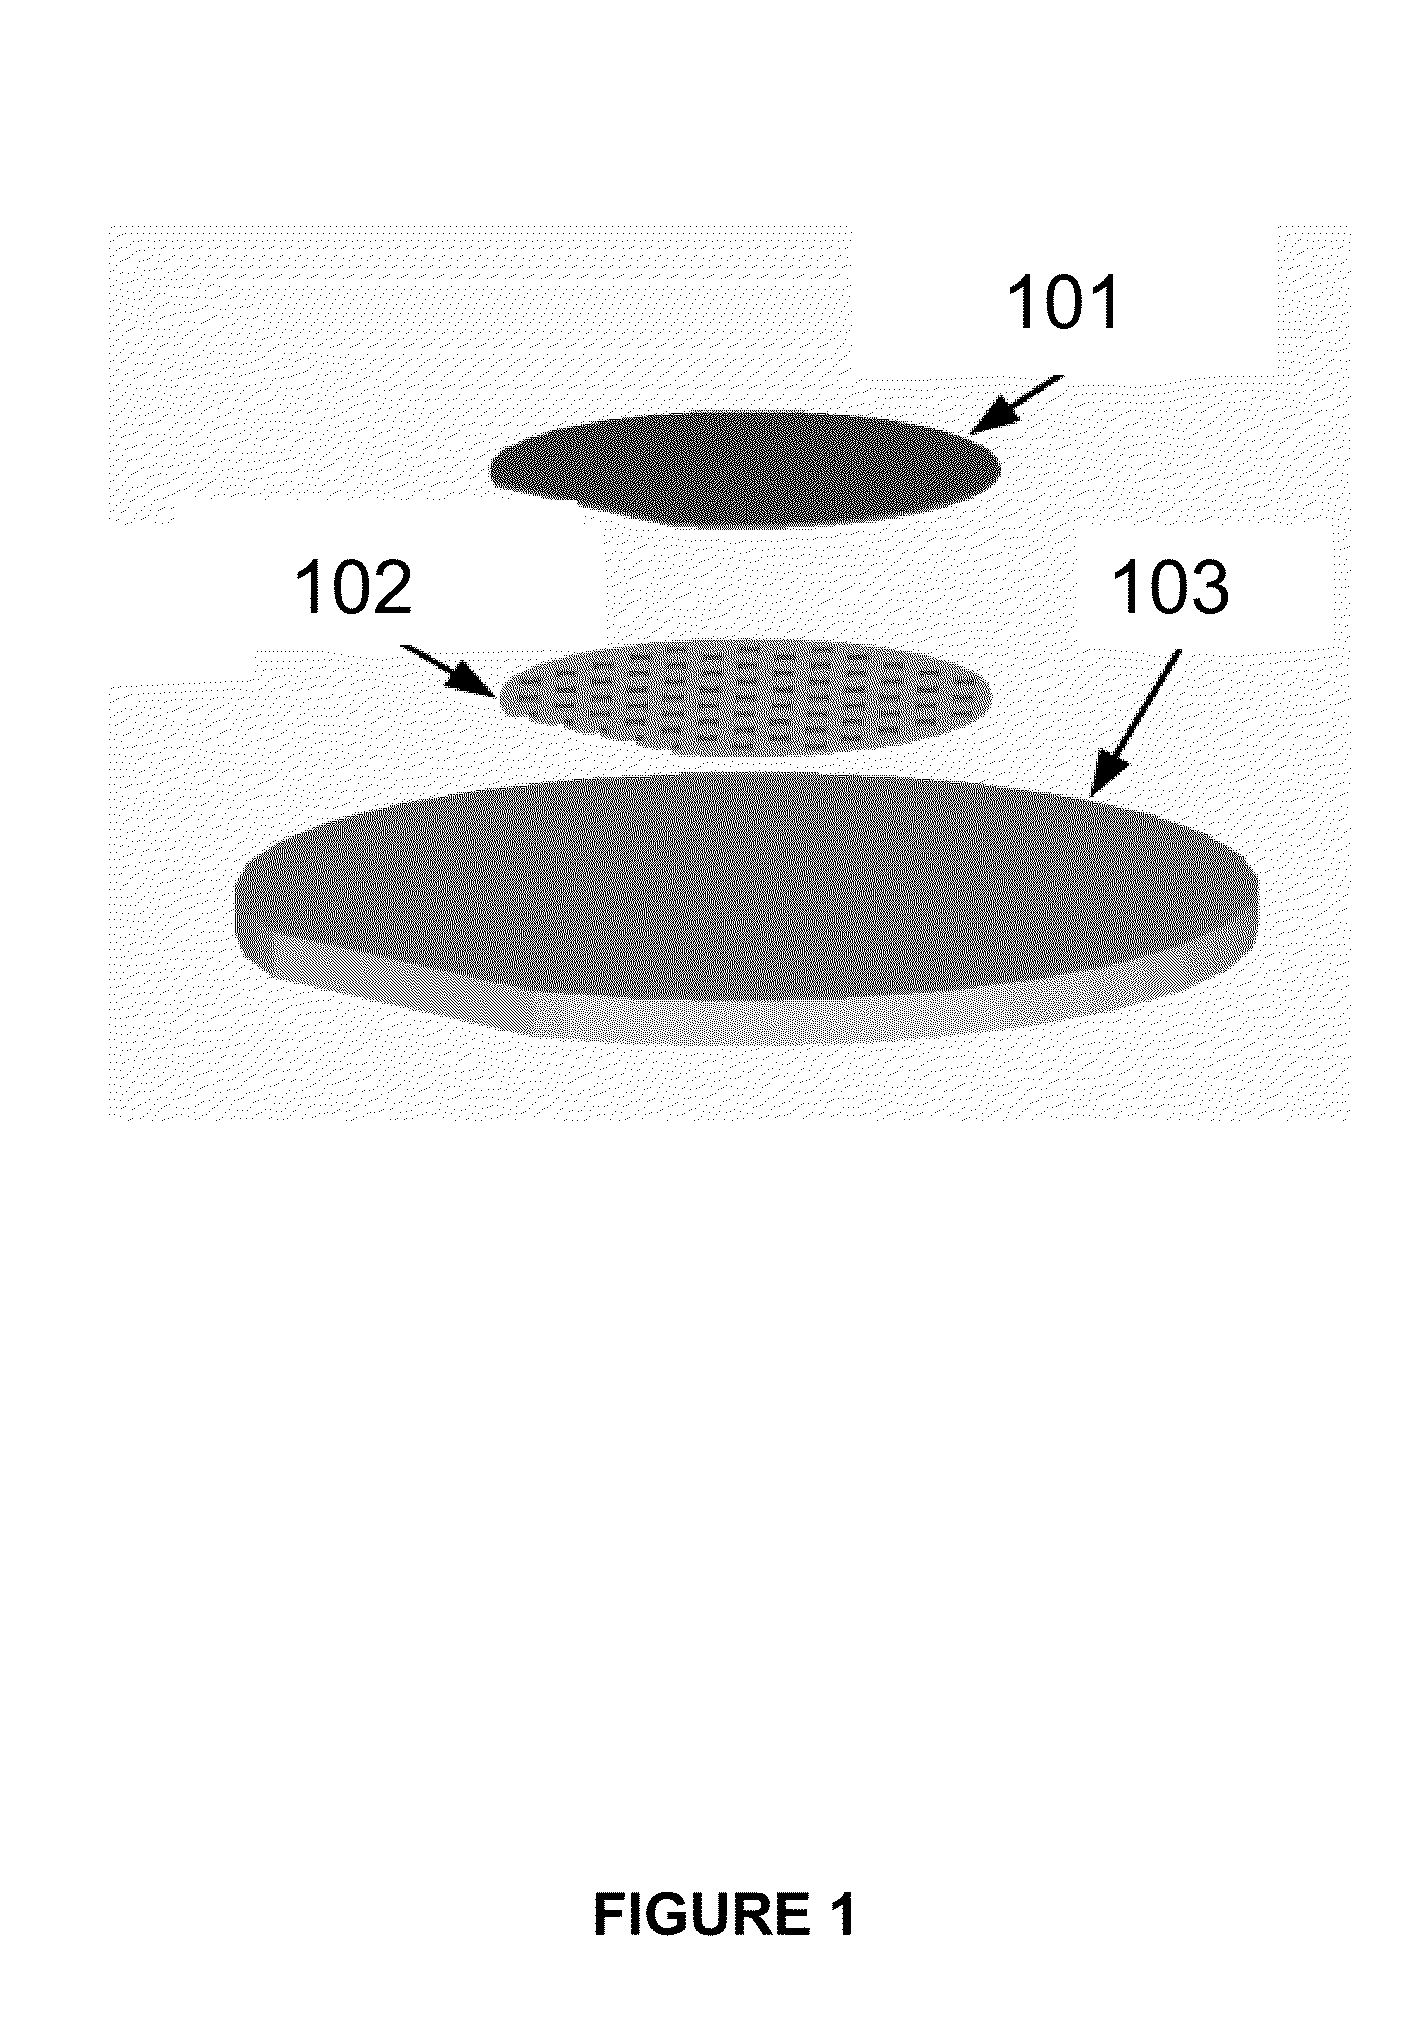 Micromachined neural probes